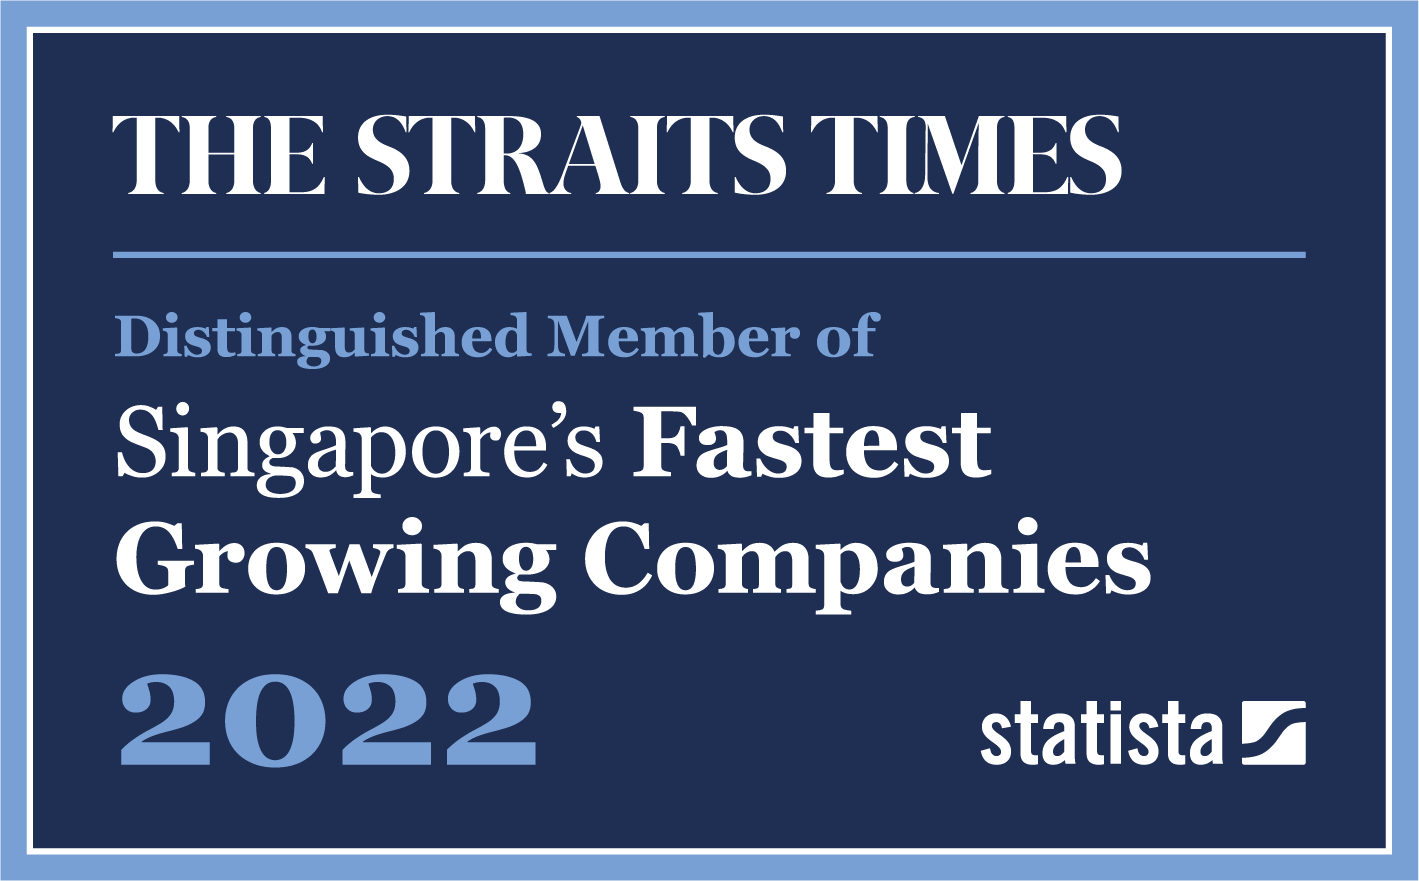 Singapore's Fastest Growing Companies 2022